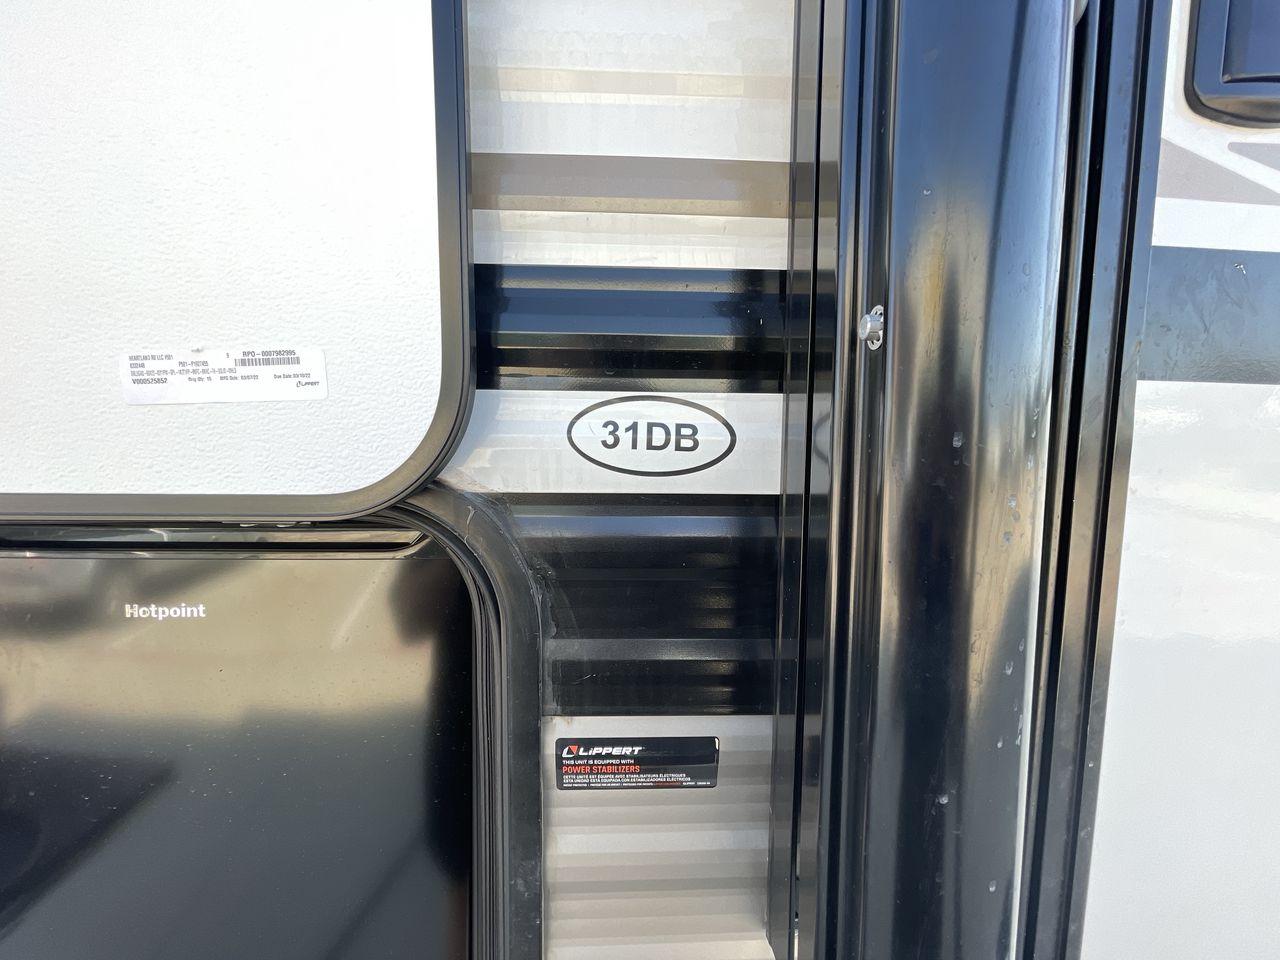 2022 HEARTLAND TRAIL RUNNER 31DB (5SFEB3728NE) , Length: 36.92 ft. | Dry Weight: 7,040 lbs. | Gross Weight: 9,642 lbs. | Slides: 1 transmission, located at 4319 N Main Street, Cleburne, TX, 76033, (817) 221-0660, 32.435829, -97.384178 - Discover extra features that contribute to making this RV an ideal investment. (1) It features like a designated pet feeding station and easy-to-clean flooring, making your pet feel just as welcome as the human members of the crew. (2) The Trail Runner 31DB features a convenient pass-through st - Photo #21